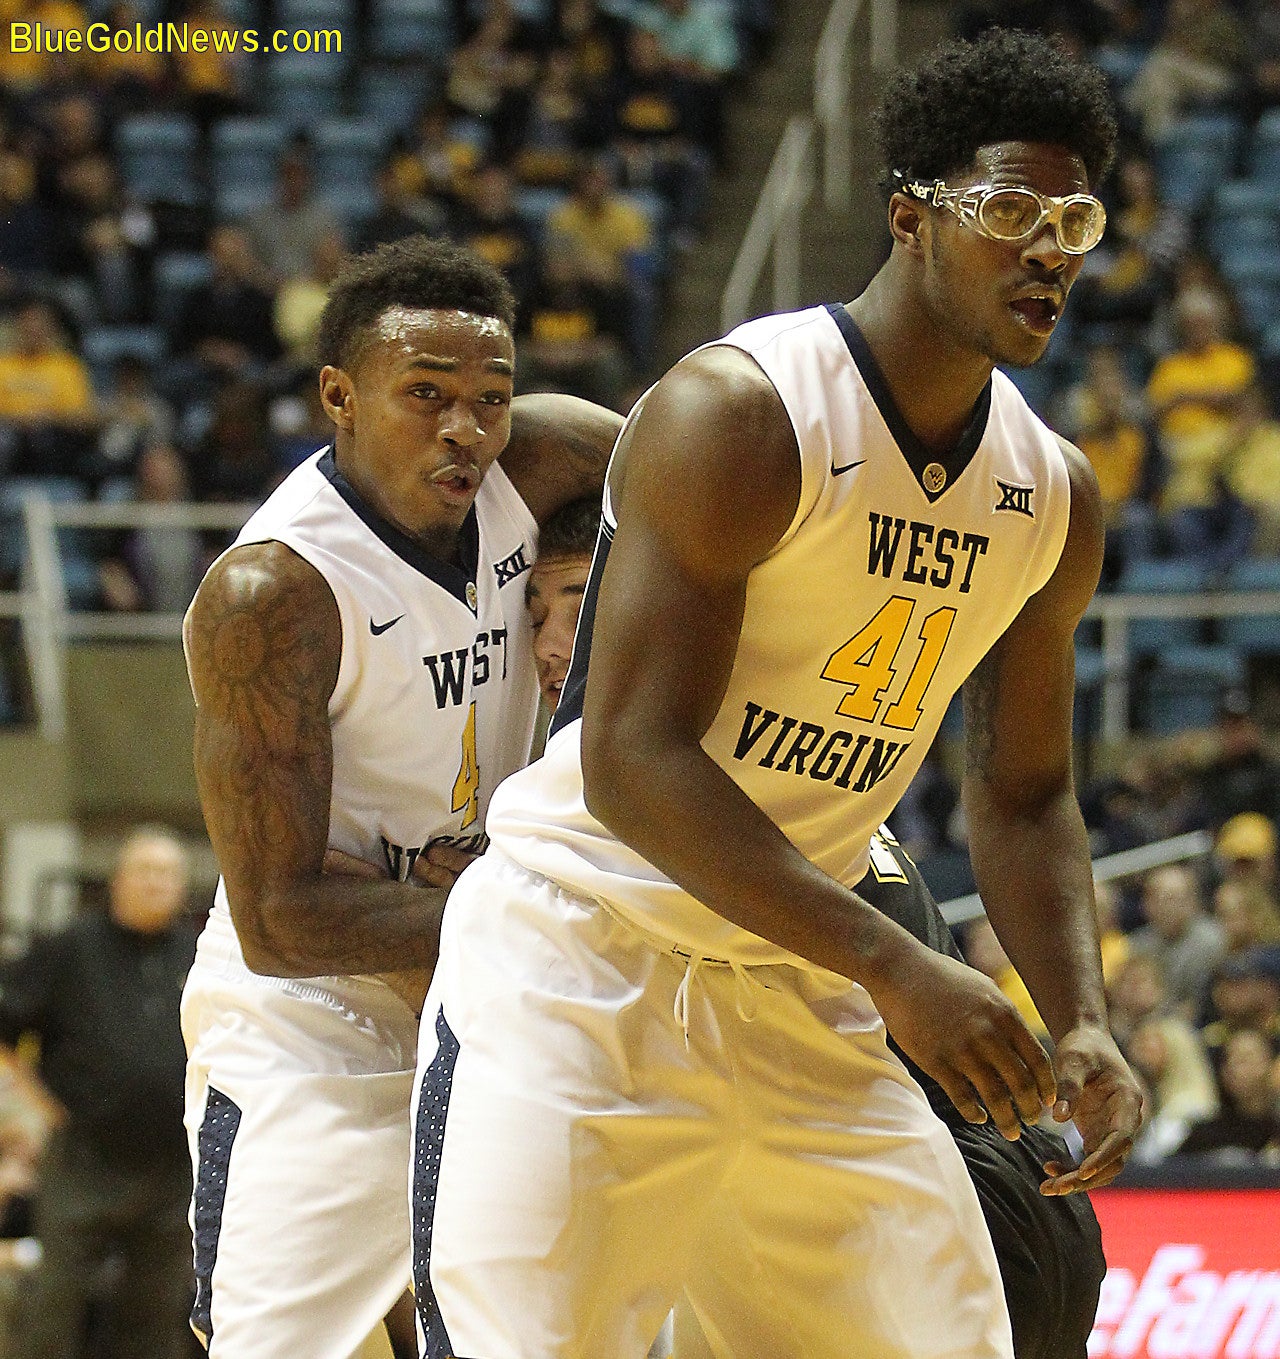 Devin Williams Signs With Agent, Officially Ending WVU Career